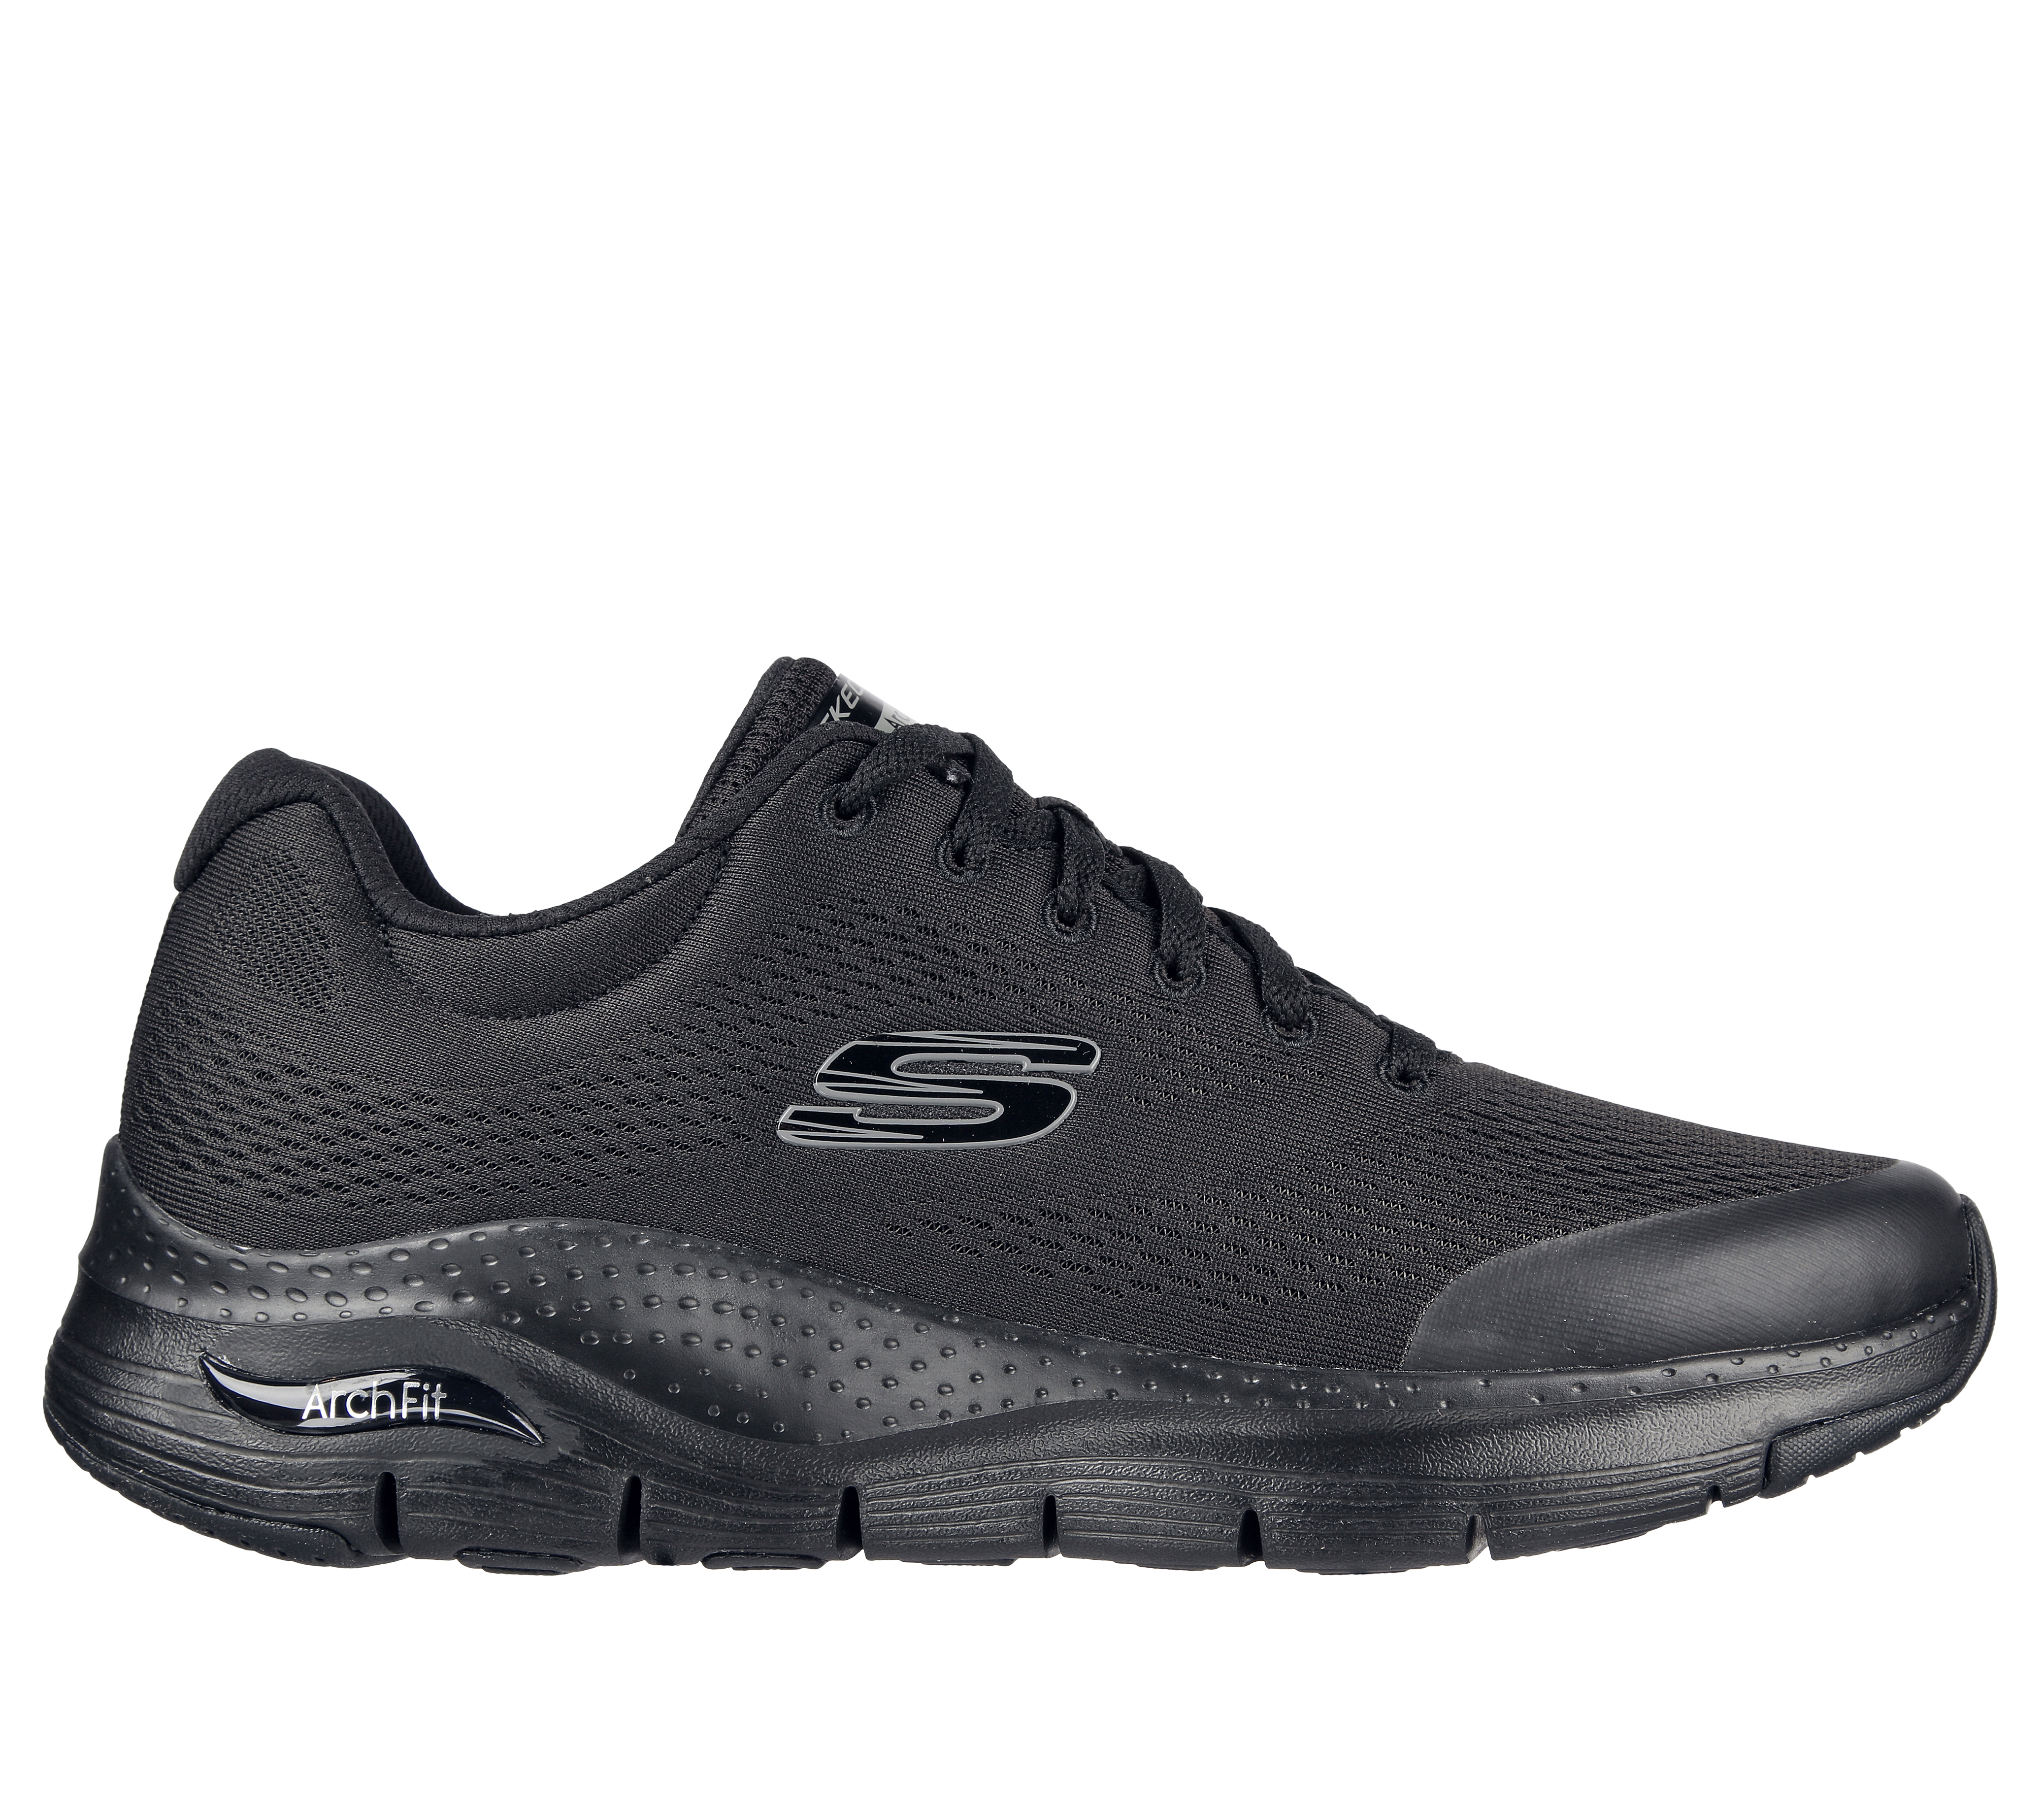 What Are the Best Skechers for Arch Support?